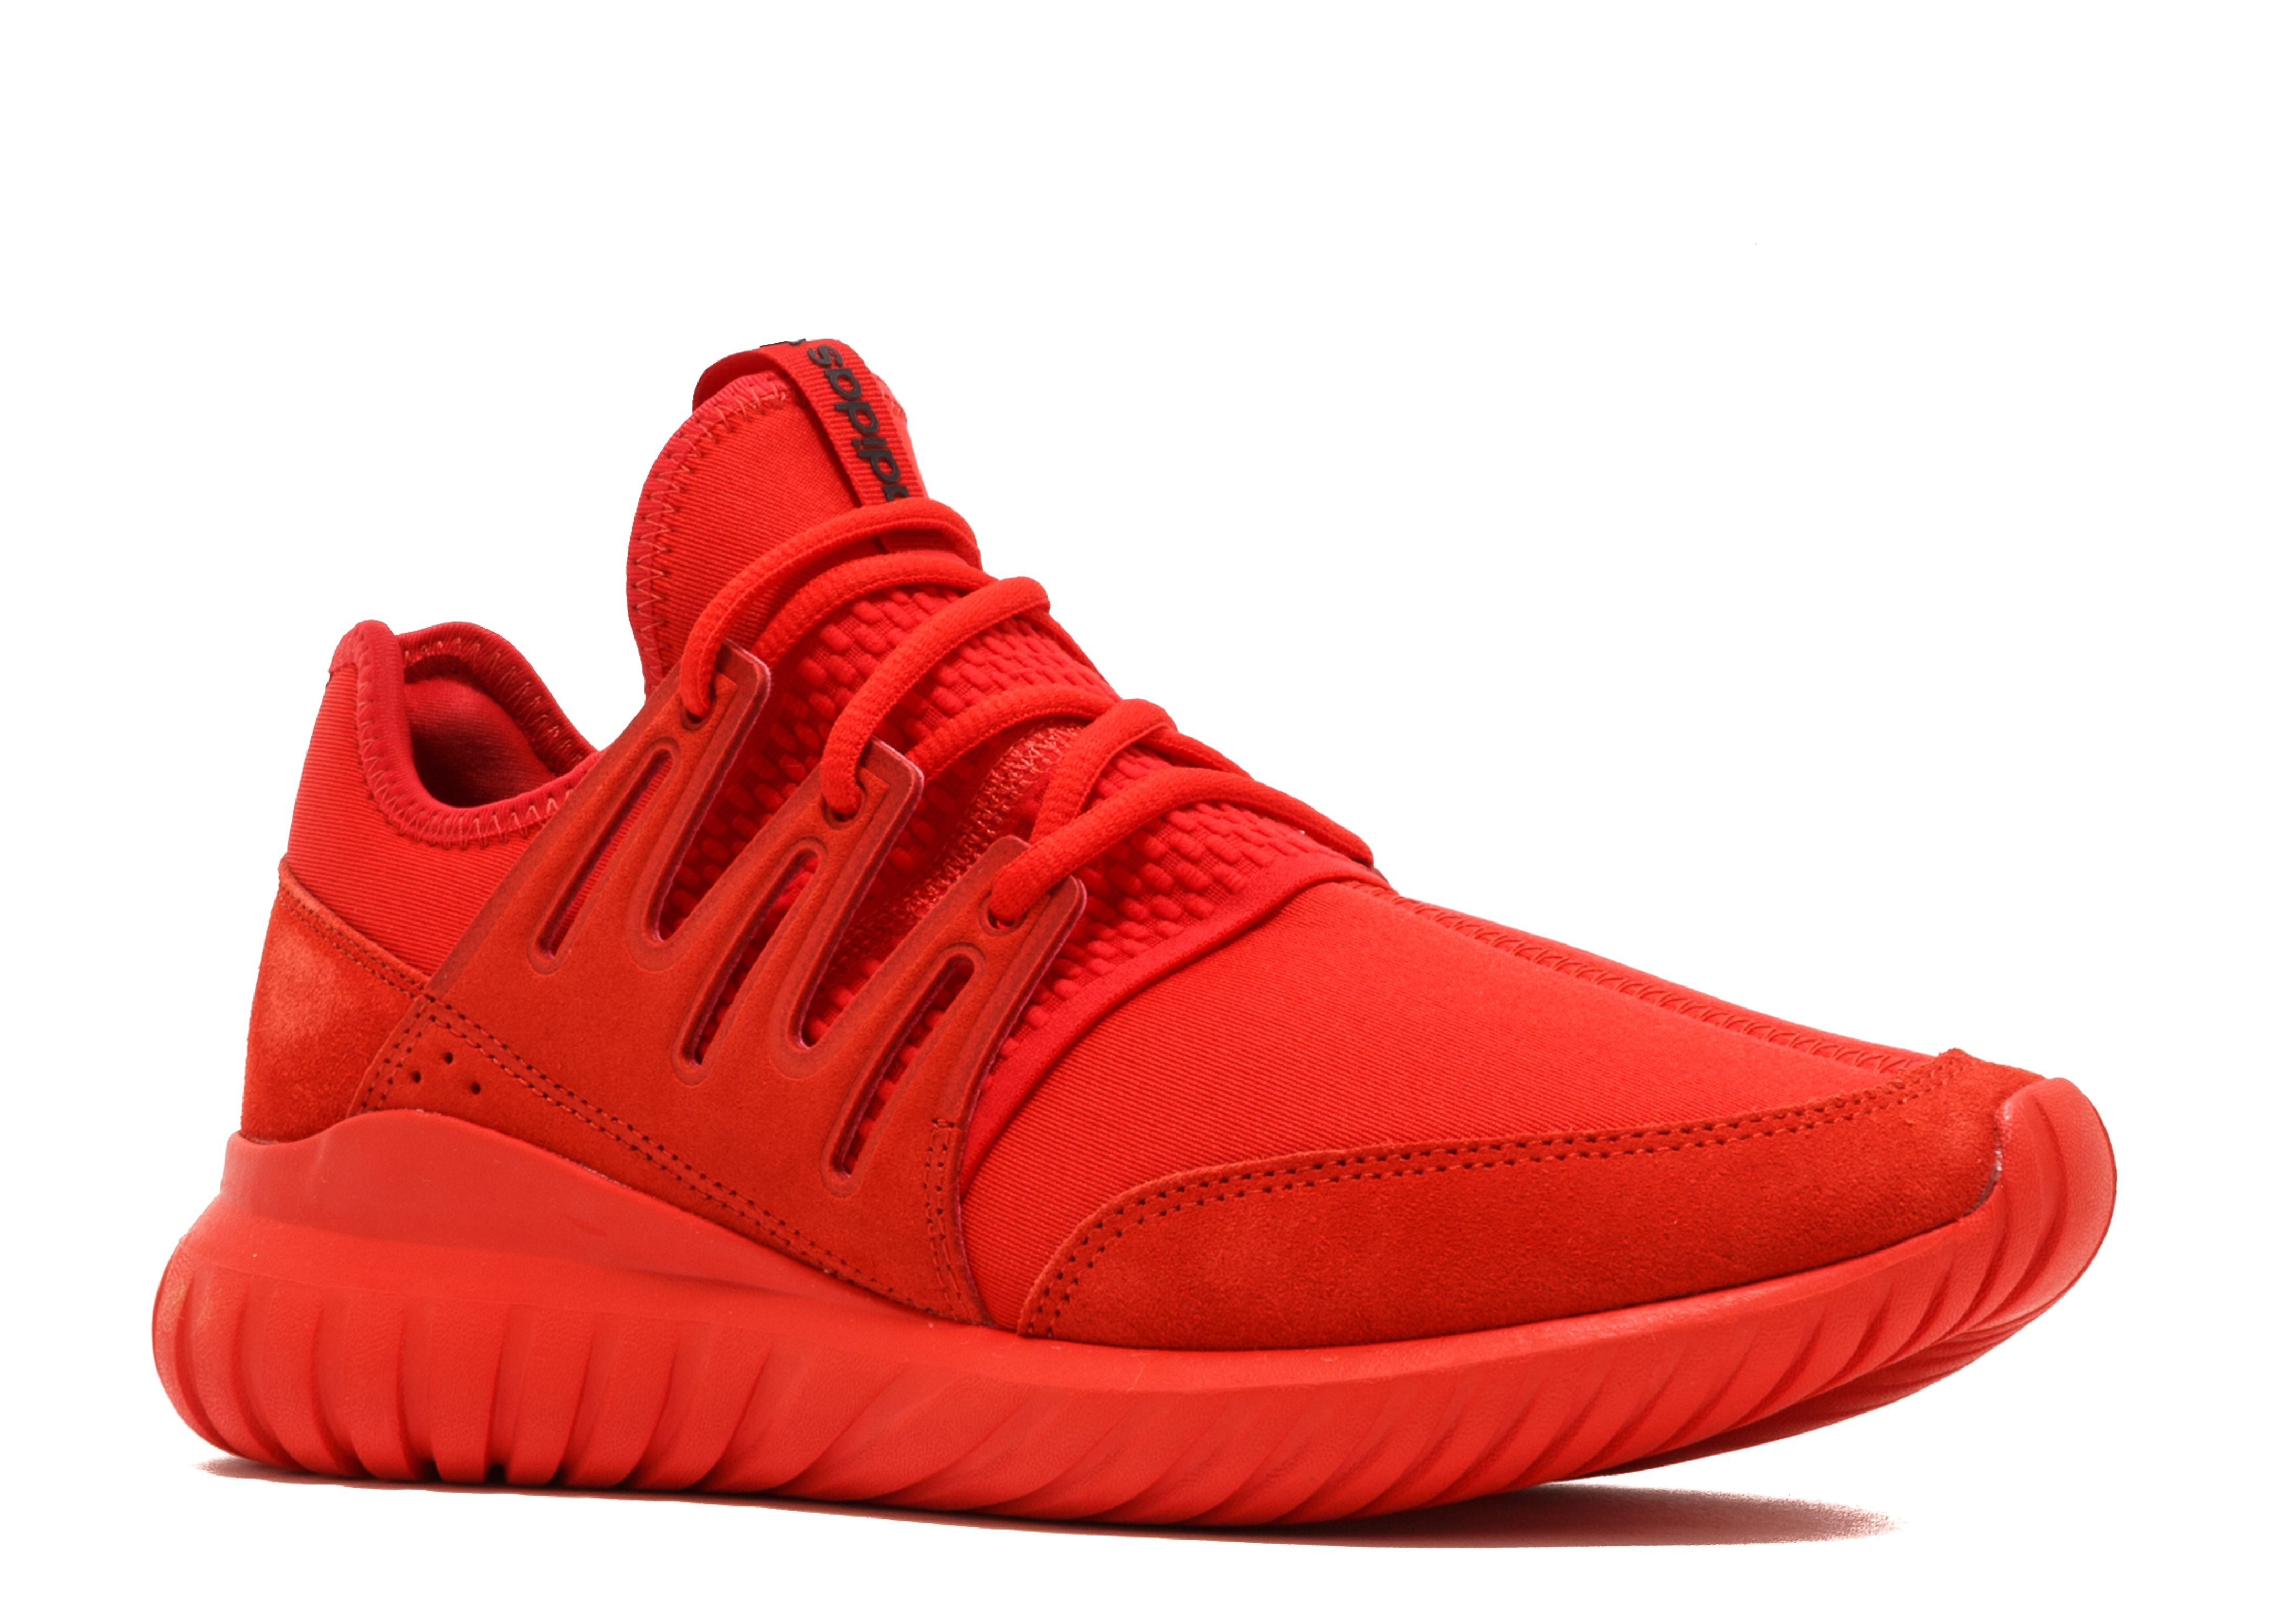 Tubular Radial 'Red' 'Red' - Adidas - S80116 - red/red/core black | Flight  Club